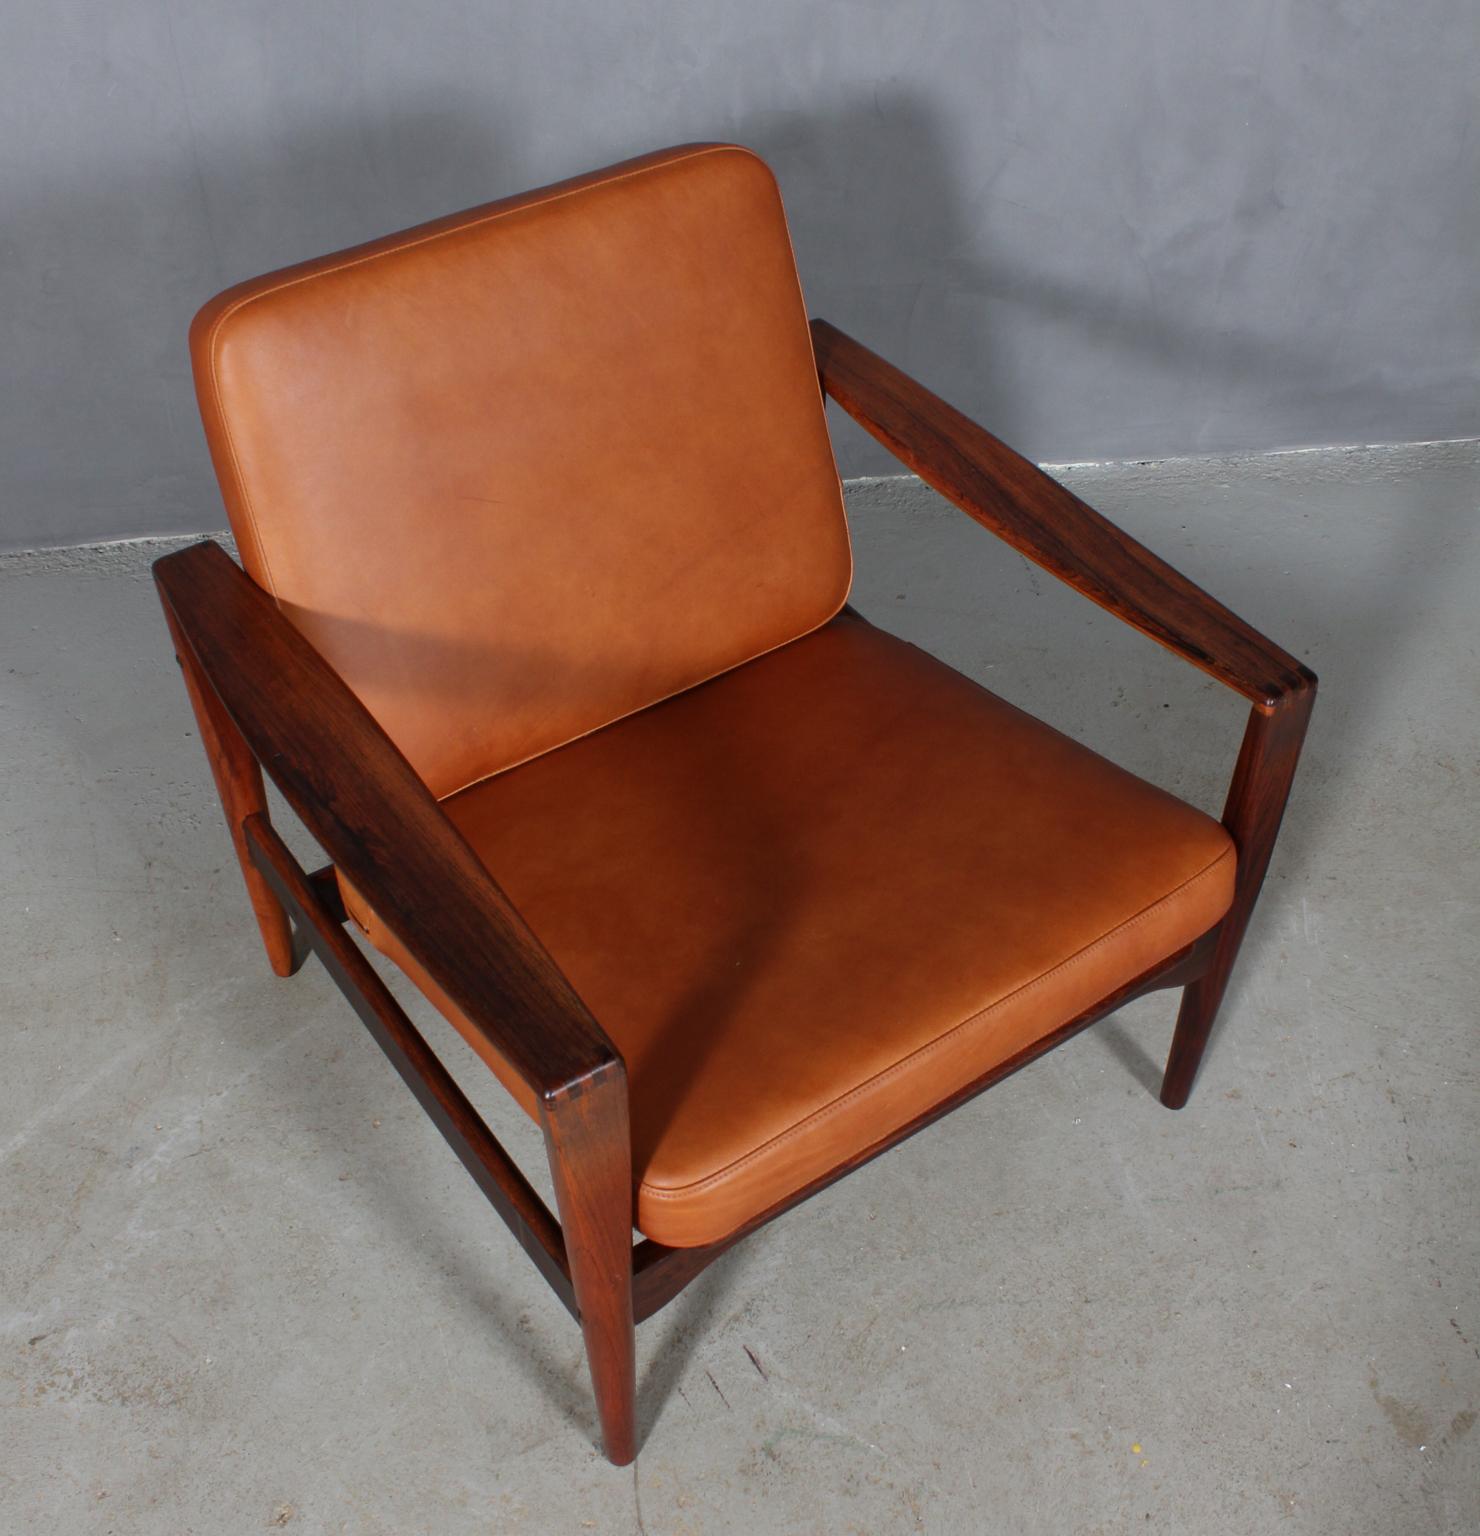 Illum Wikkelsø lounge chair in solid rosewood.

New upholstered cushions in tan Vintage anilin leather.

Model EK. Very rare.